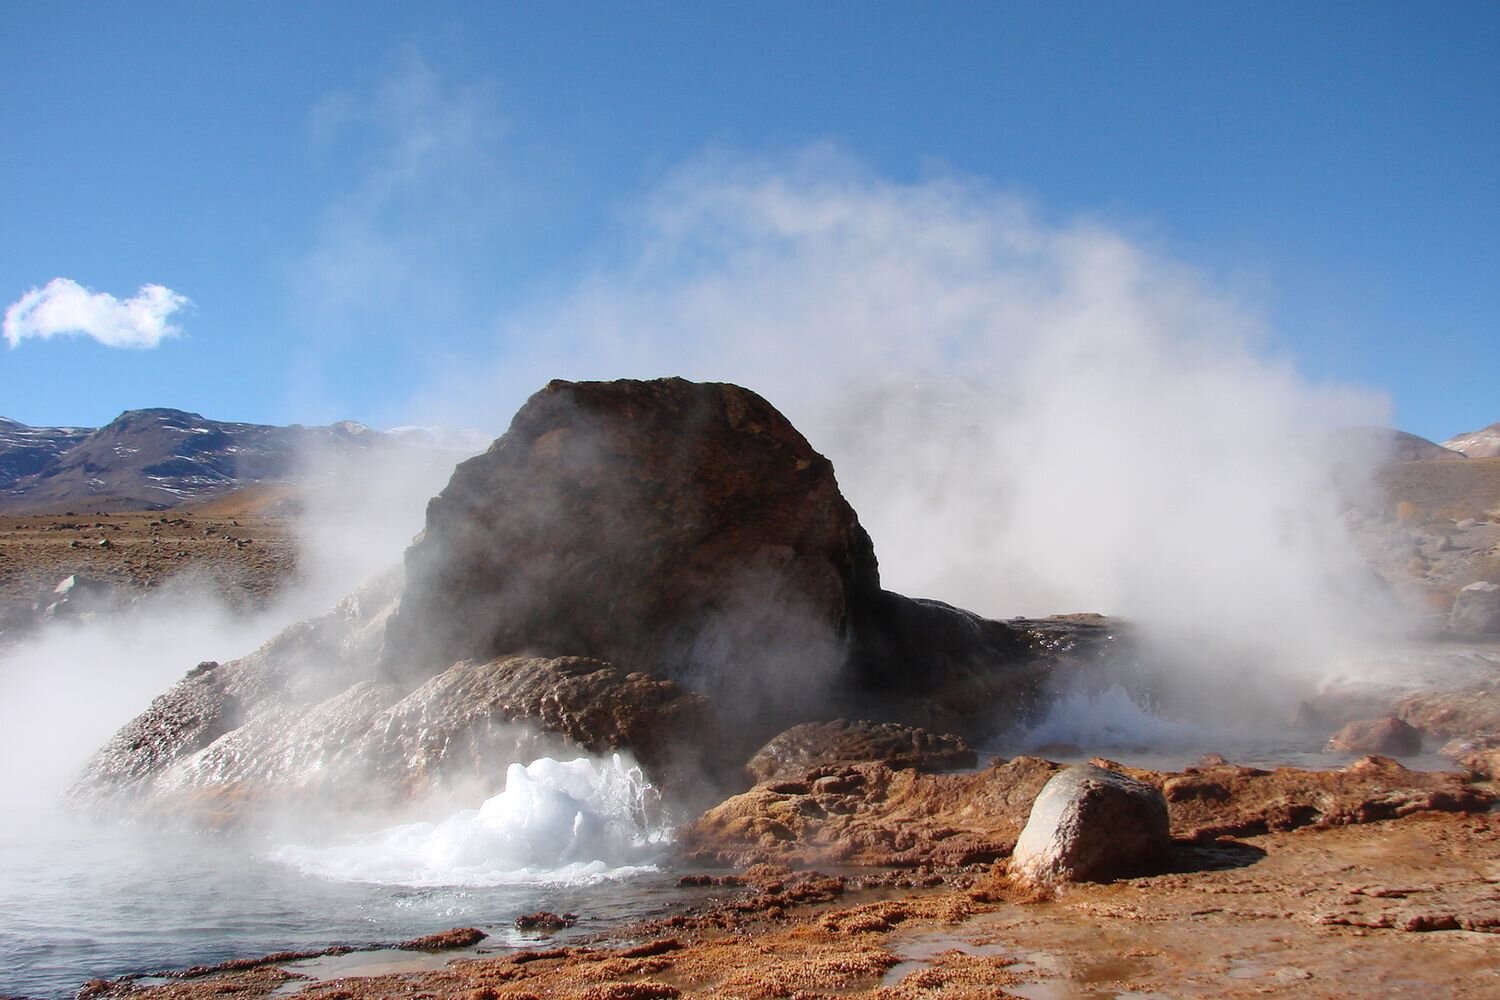  As part of our acclimatatazing process, we explore the Tatio Geyser field. Chilean Altiplano. 